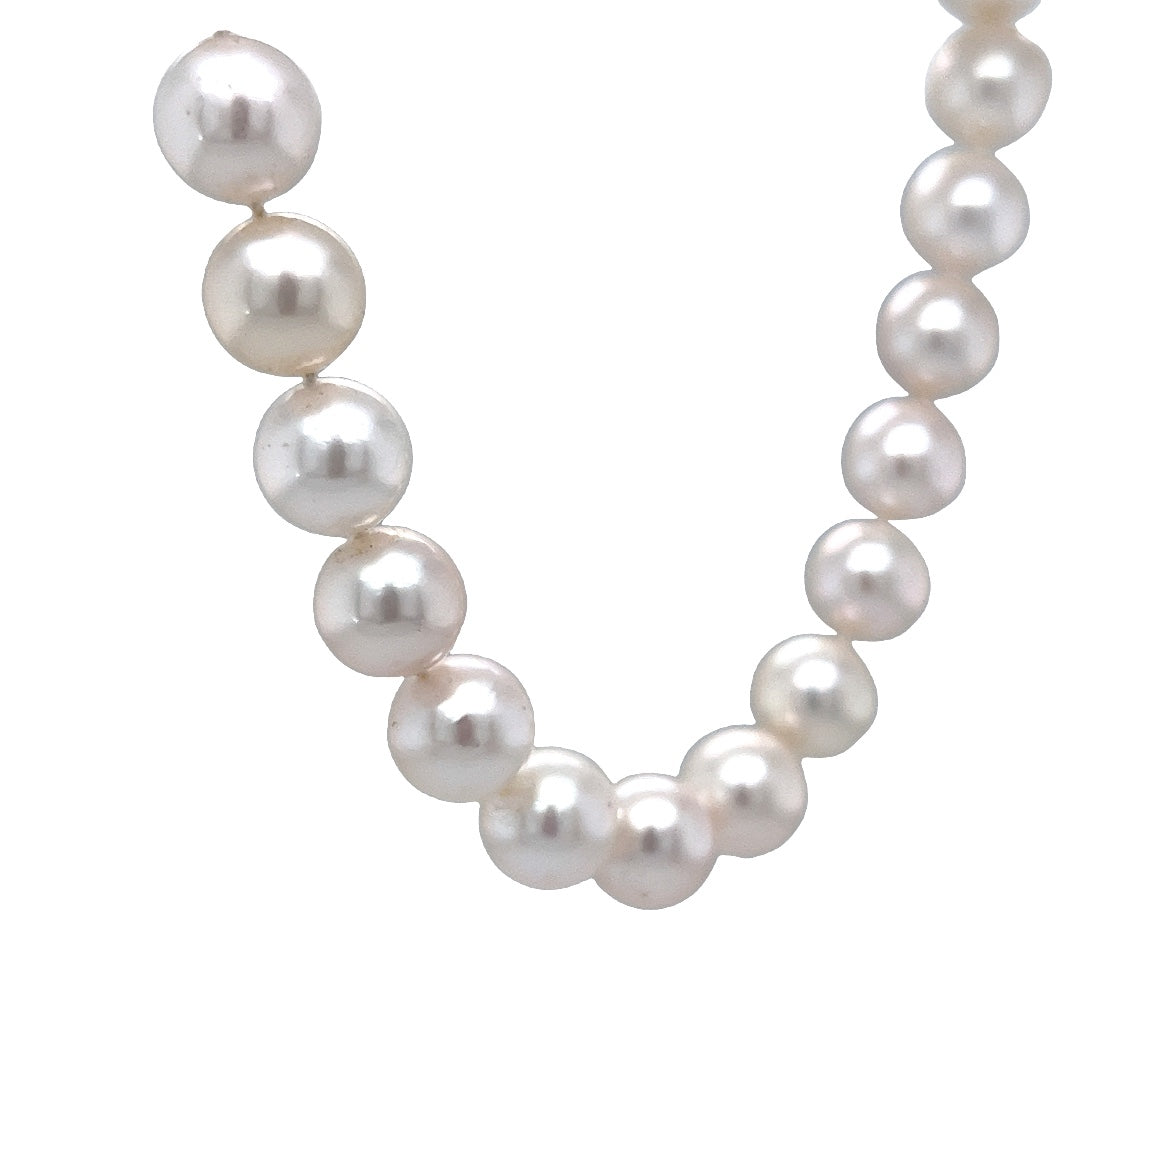 Necklace Modern Pearls & .10 Round Brilliant Cut Diamonds in 14k Yellow Gold